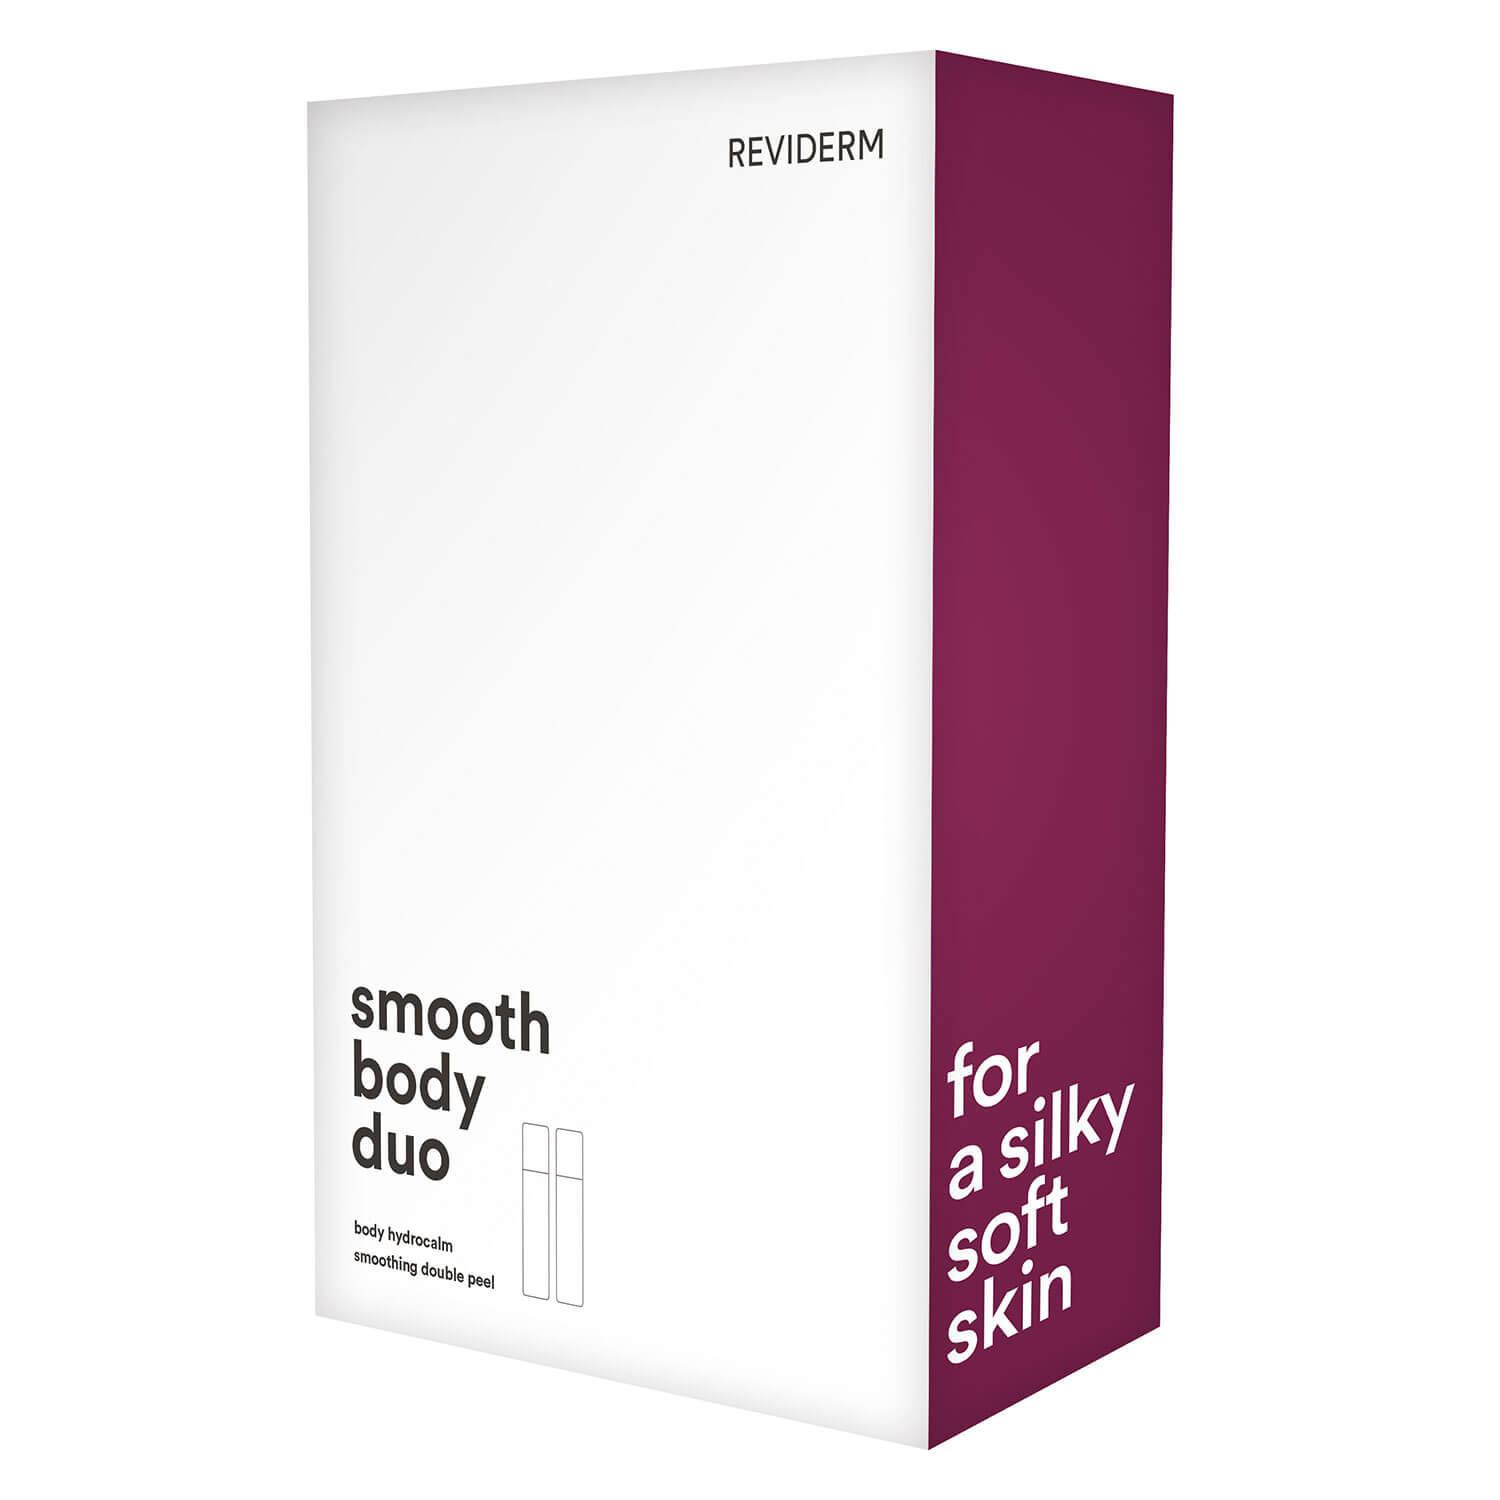 Reviderm Skin Care - smooth body duo Set